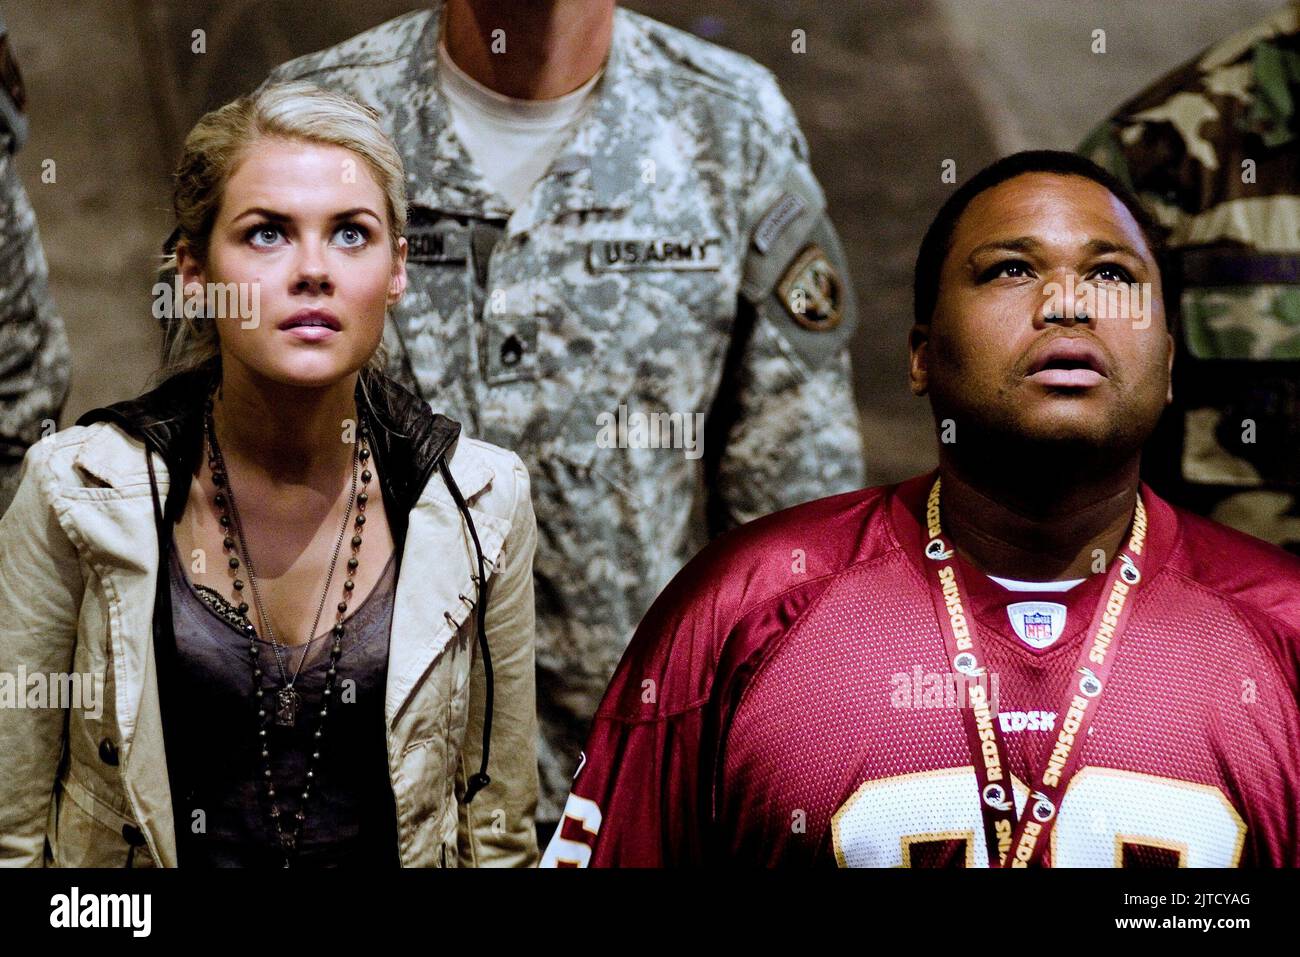 RACHAEL TAYLOR, ANTHONY ANDERSON, TRANSFORMERS, 2007 Stock Photo